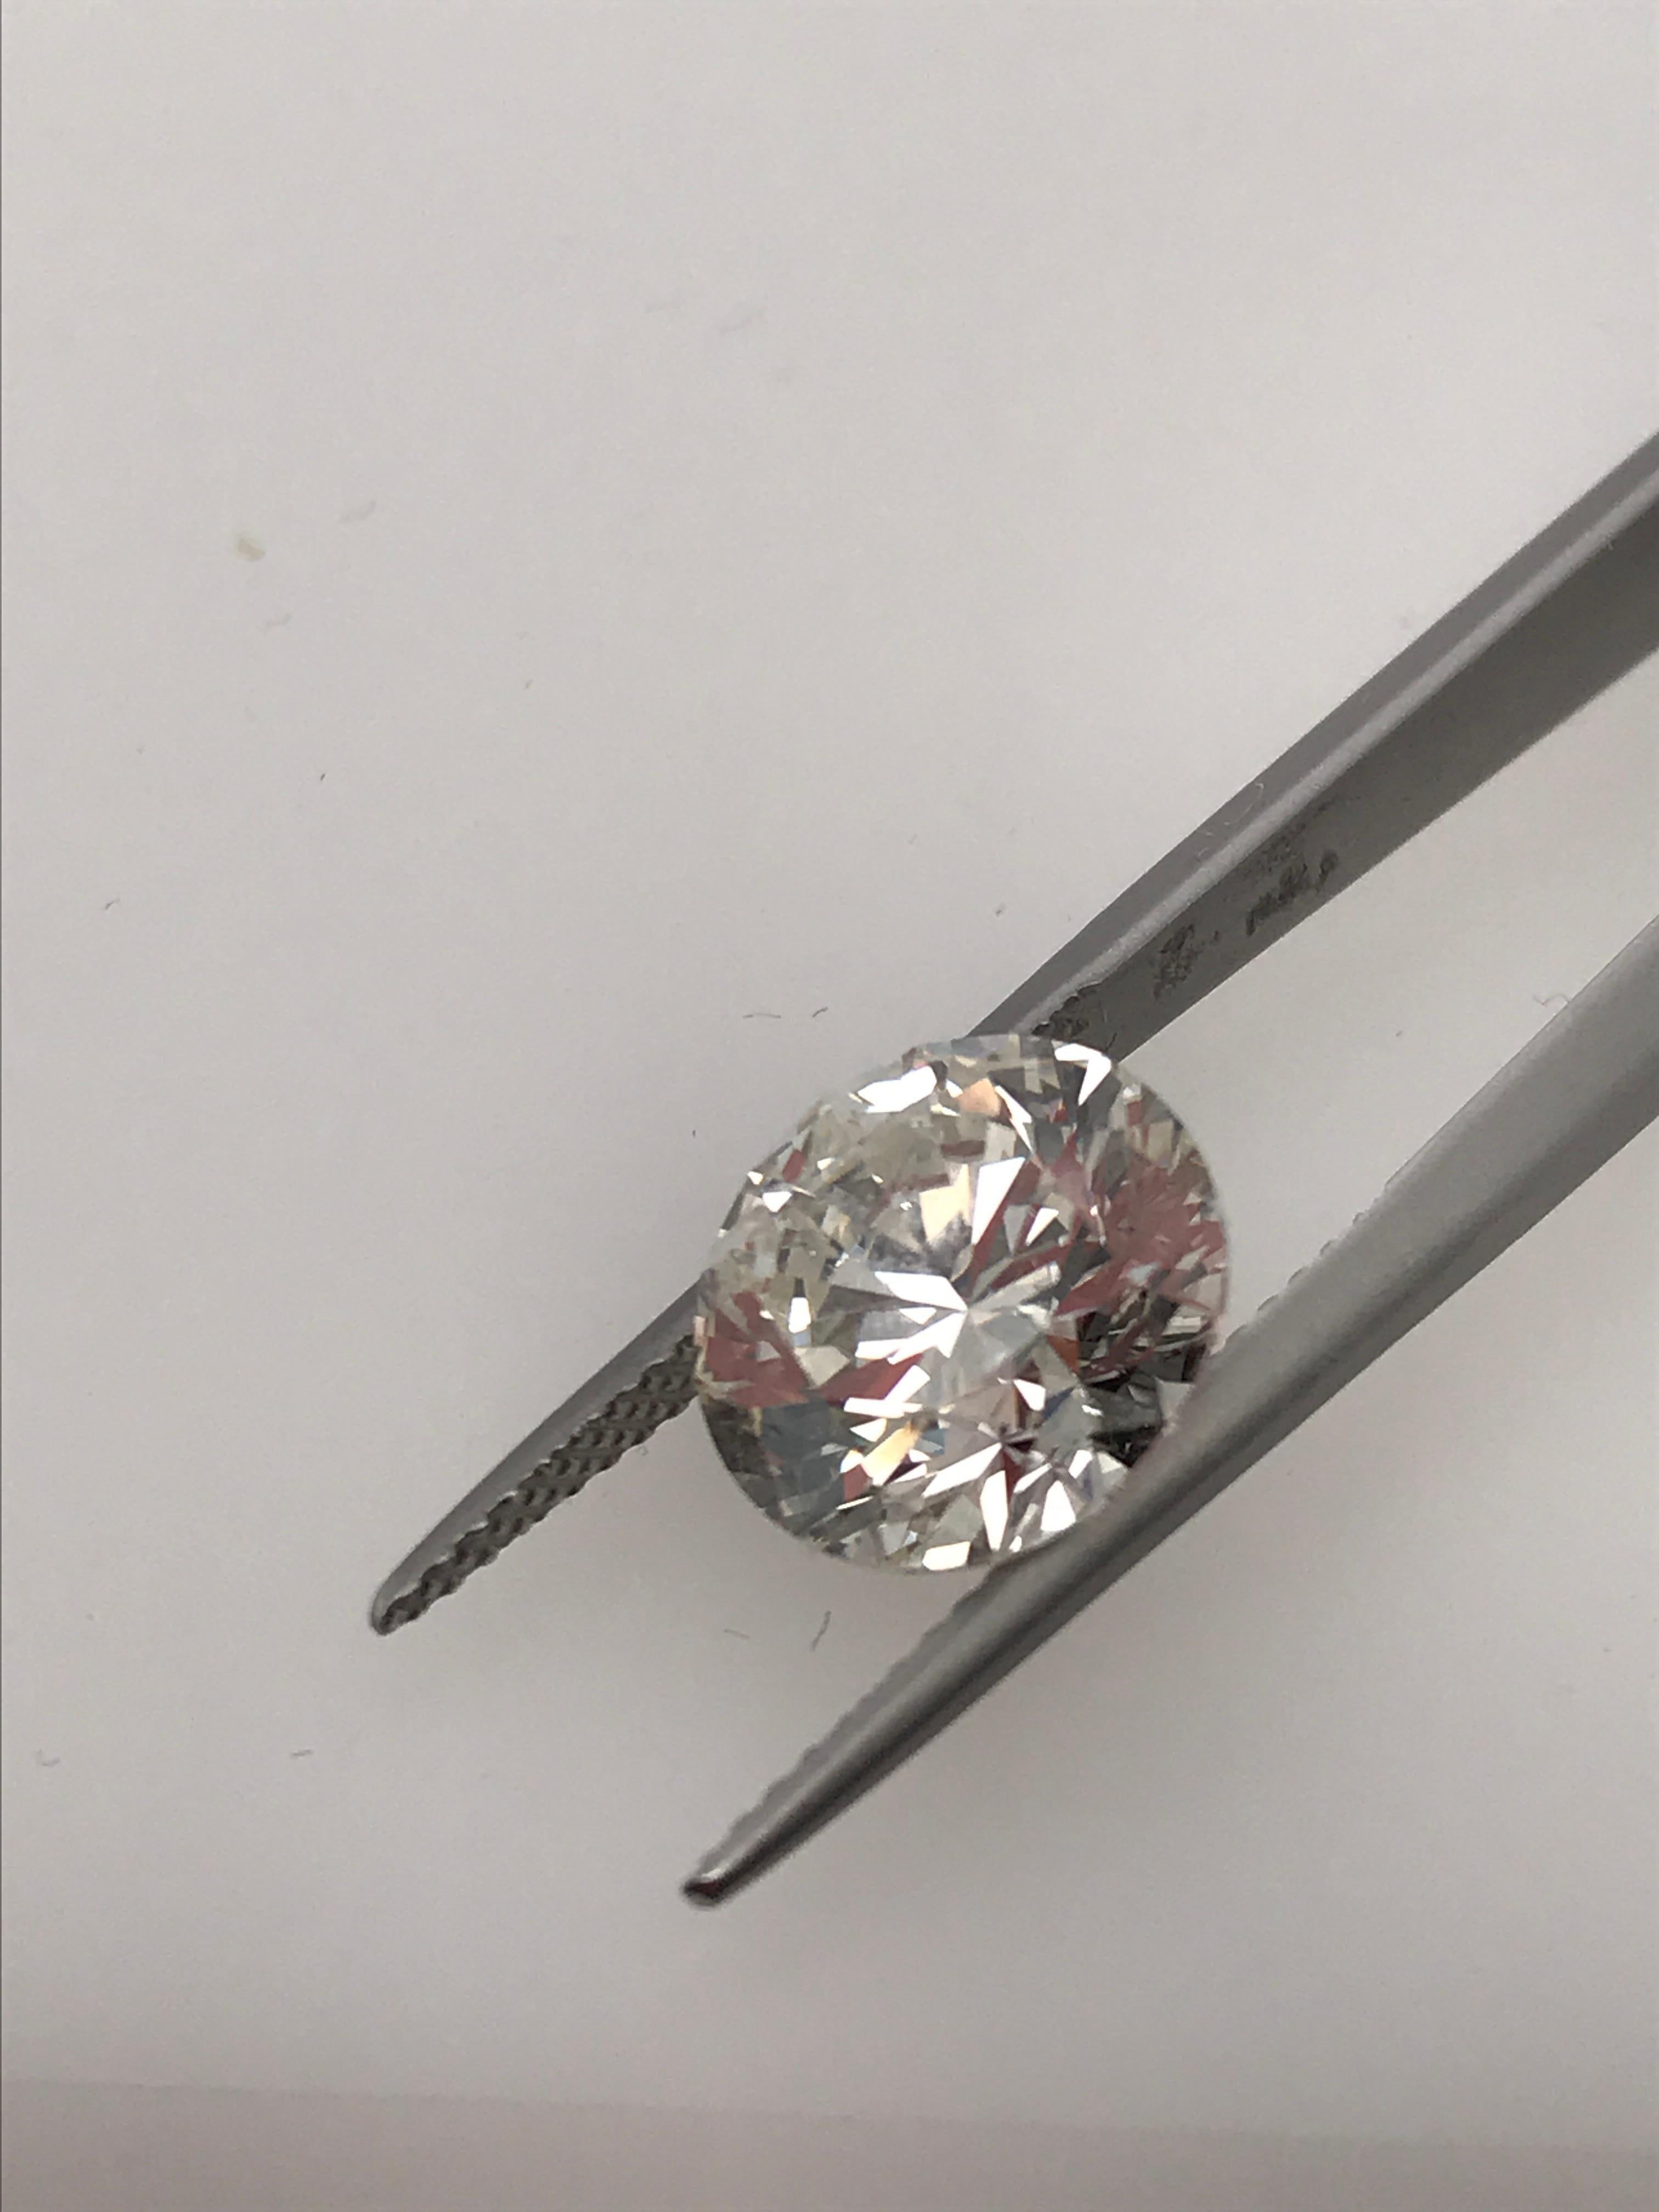 Perfectly made 4.28 carat round GIA diamond. Triple excellent means the diamond is has an excellent cut grade, excellent symmetry and excellent polish. The clarity is SI / 2 ( 100 % eye clean ) and I in color. Choose to give it loose or we can help